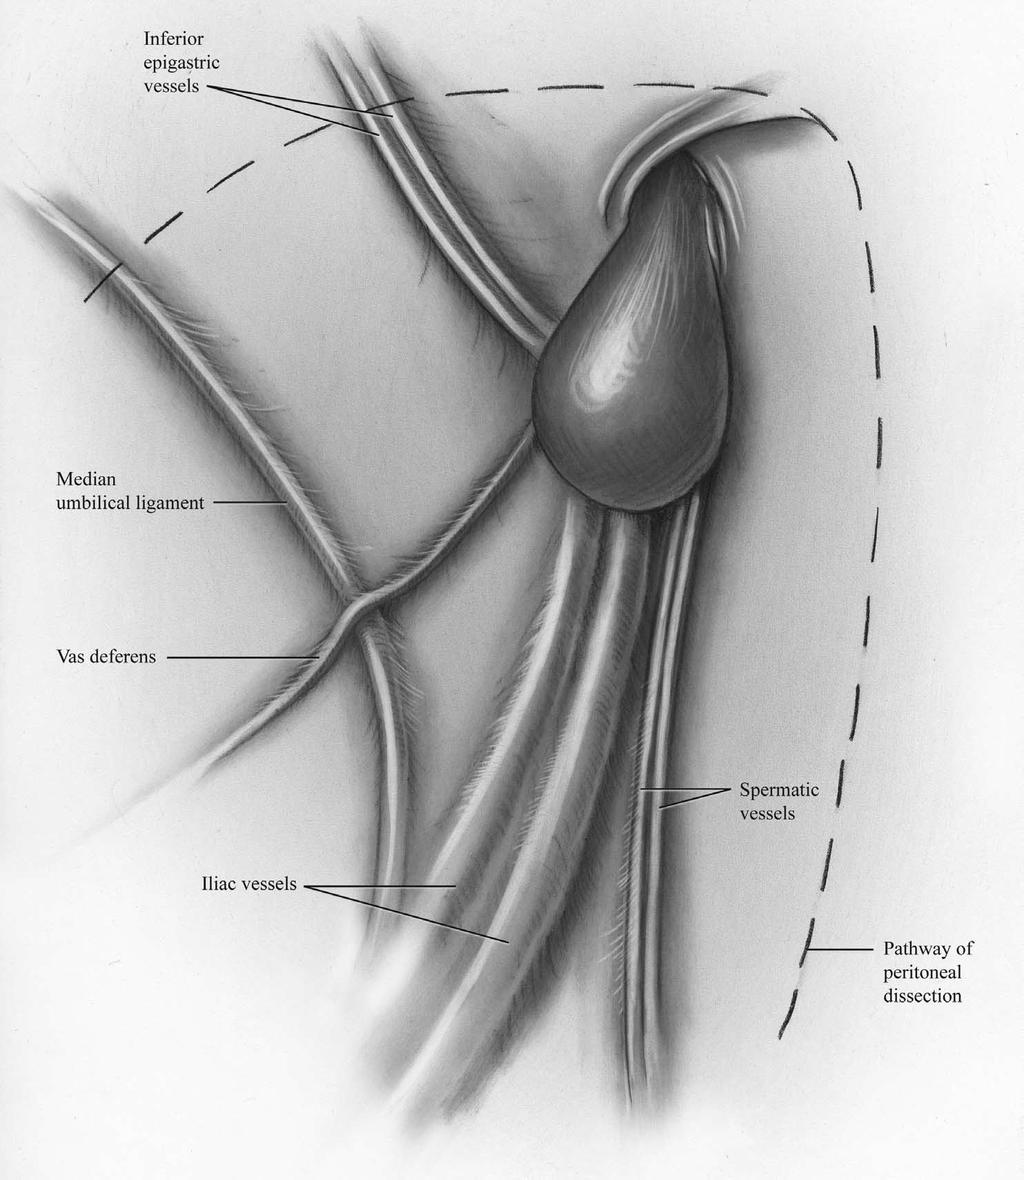 Undescended Testes/Orchiopexy 277 8 The gubernacular attachment is grasped and transected to begin mobilization of the testis.